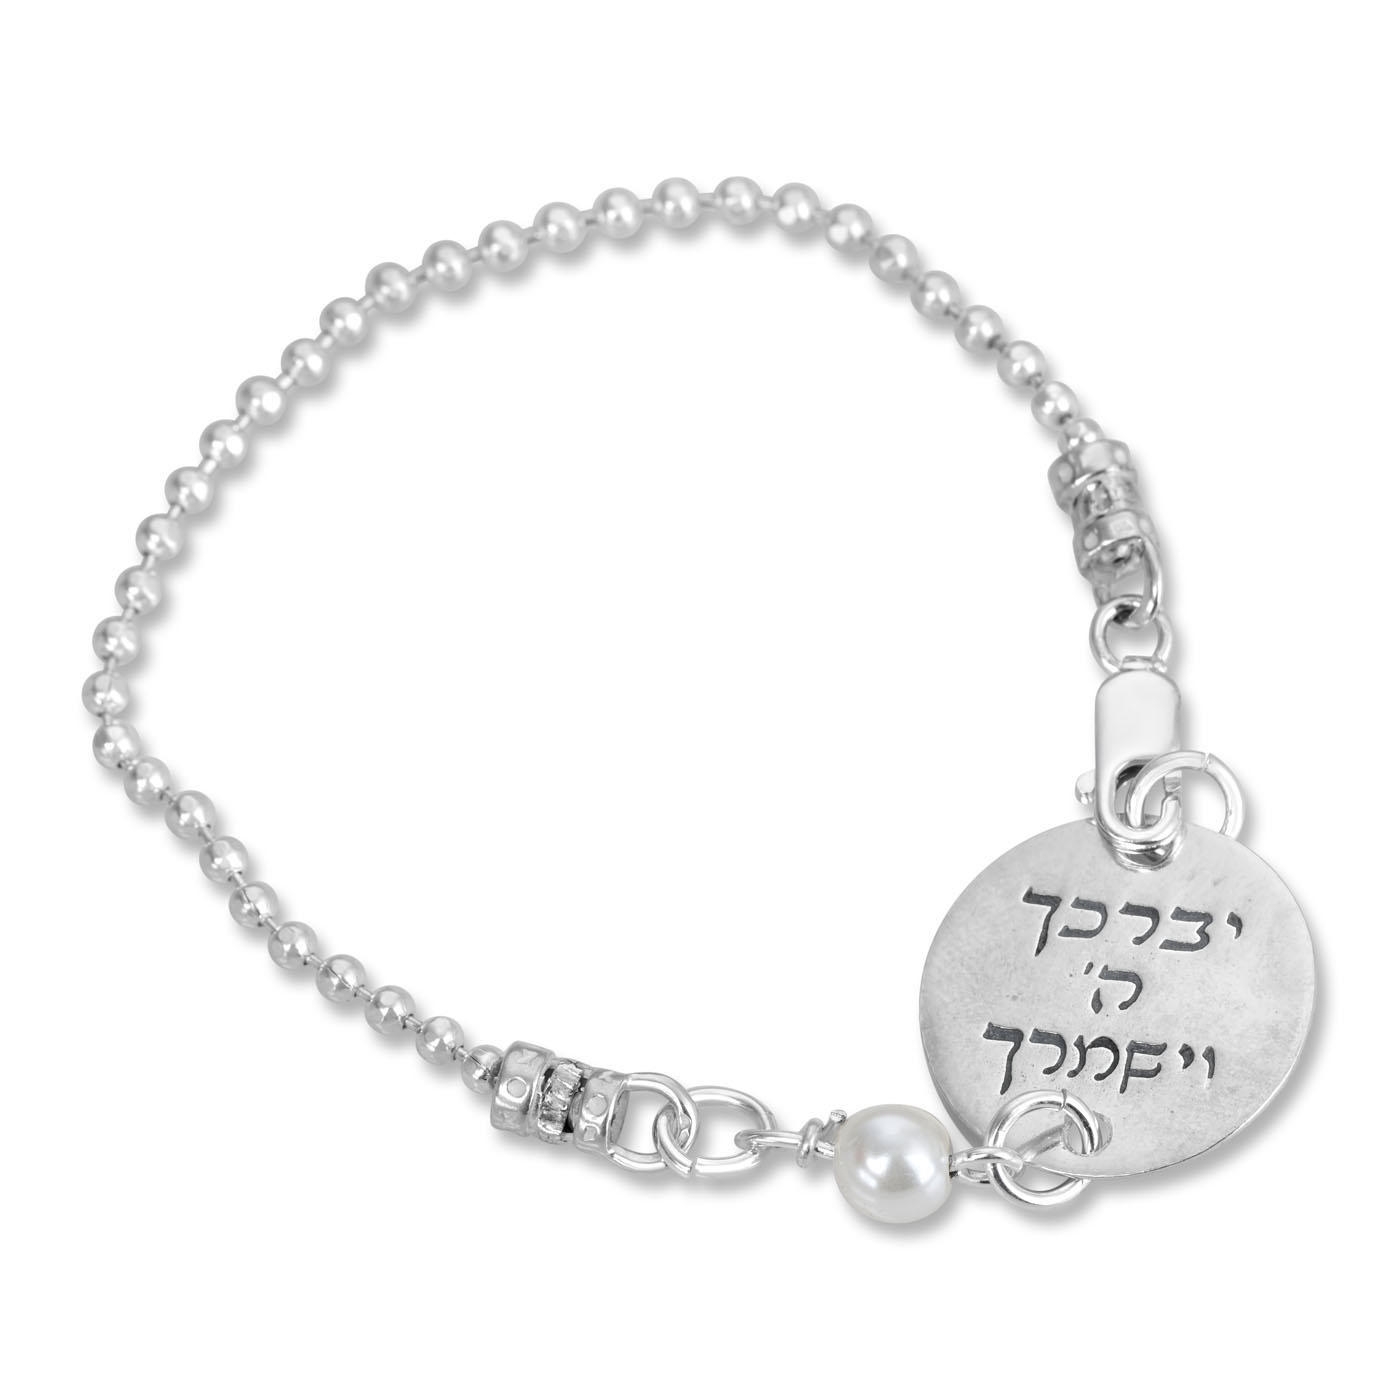 Sterling Silver Double Sided Bracelet - Priestly Blessing / Love of My Life by Or Jewelry - 1